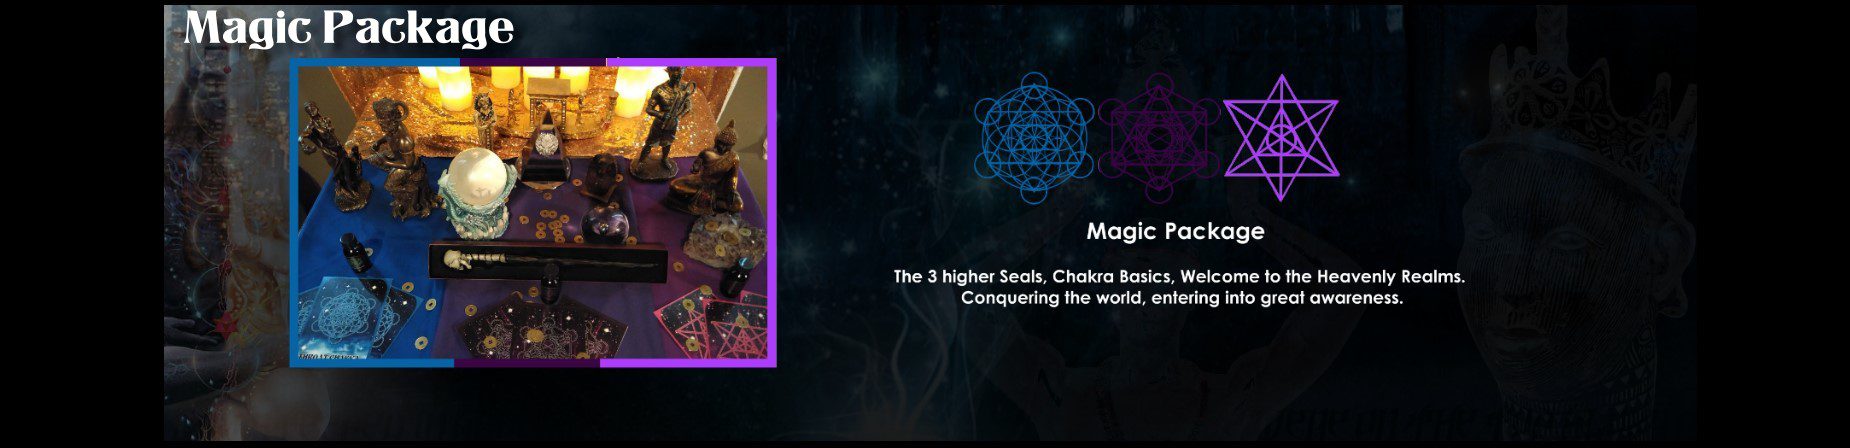 Promotional banner for "magic package" featuring mystical artifacts like crystals and candles, with text overlay and intricate geometric symbols on a dark background.